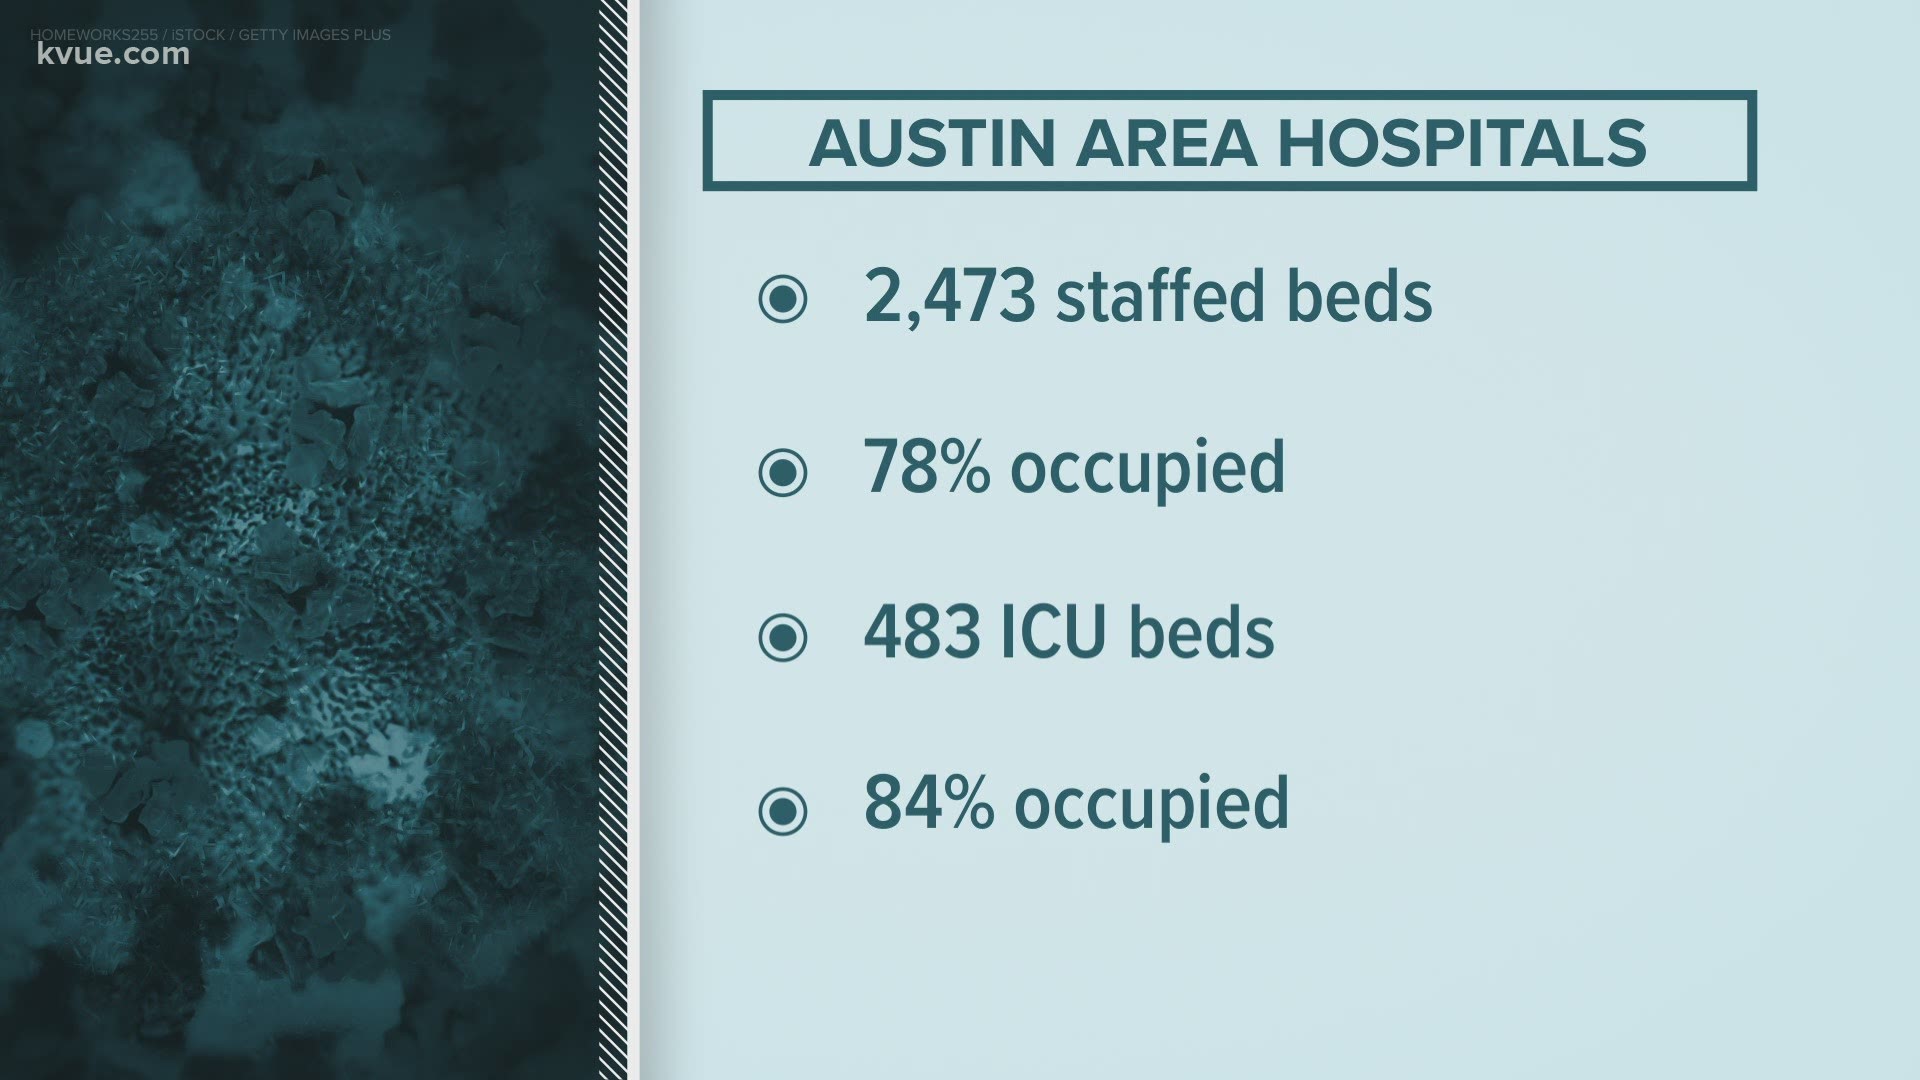 KVUE spoke with a doctor who says hospitals are prepared and will still be able to take care of patients who are sick with something other than COVID-19.